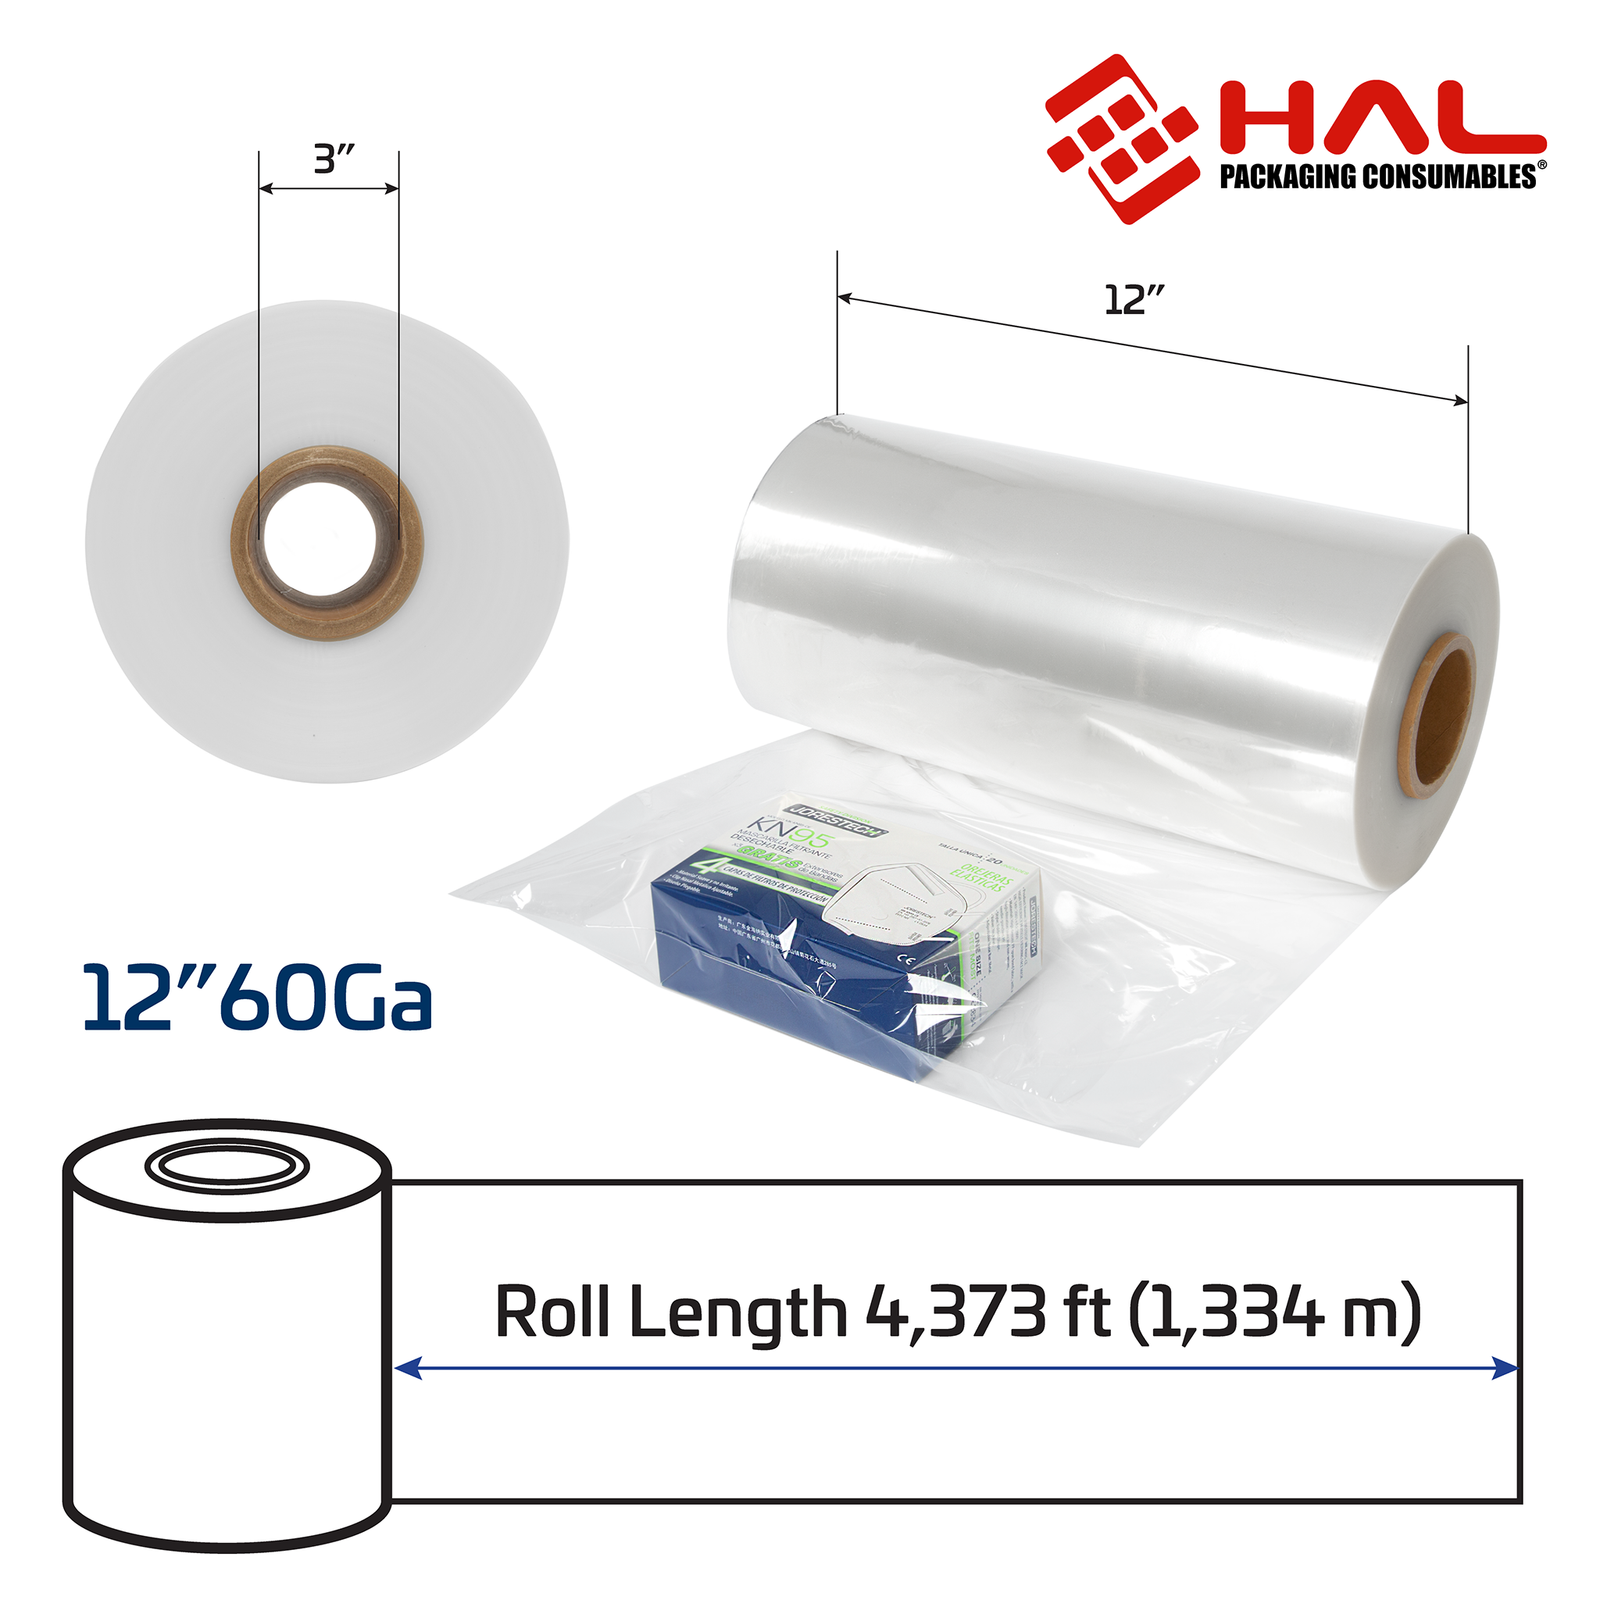 Measurements of the 60 gauge shrink wrapping film tube. 3 inch diameter of the inner core, and 12 inch width with a 4,373 ft. length.